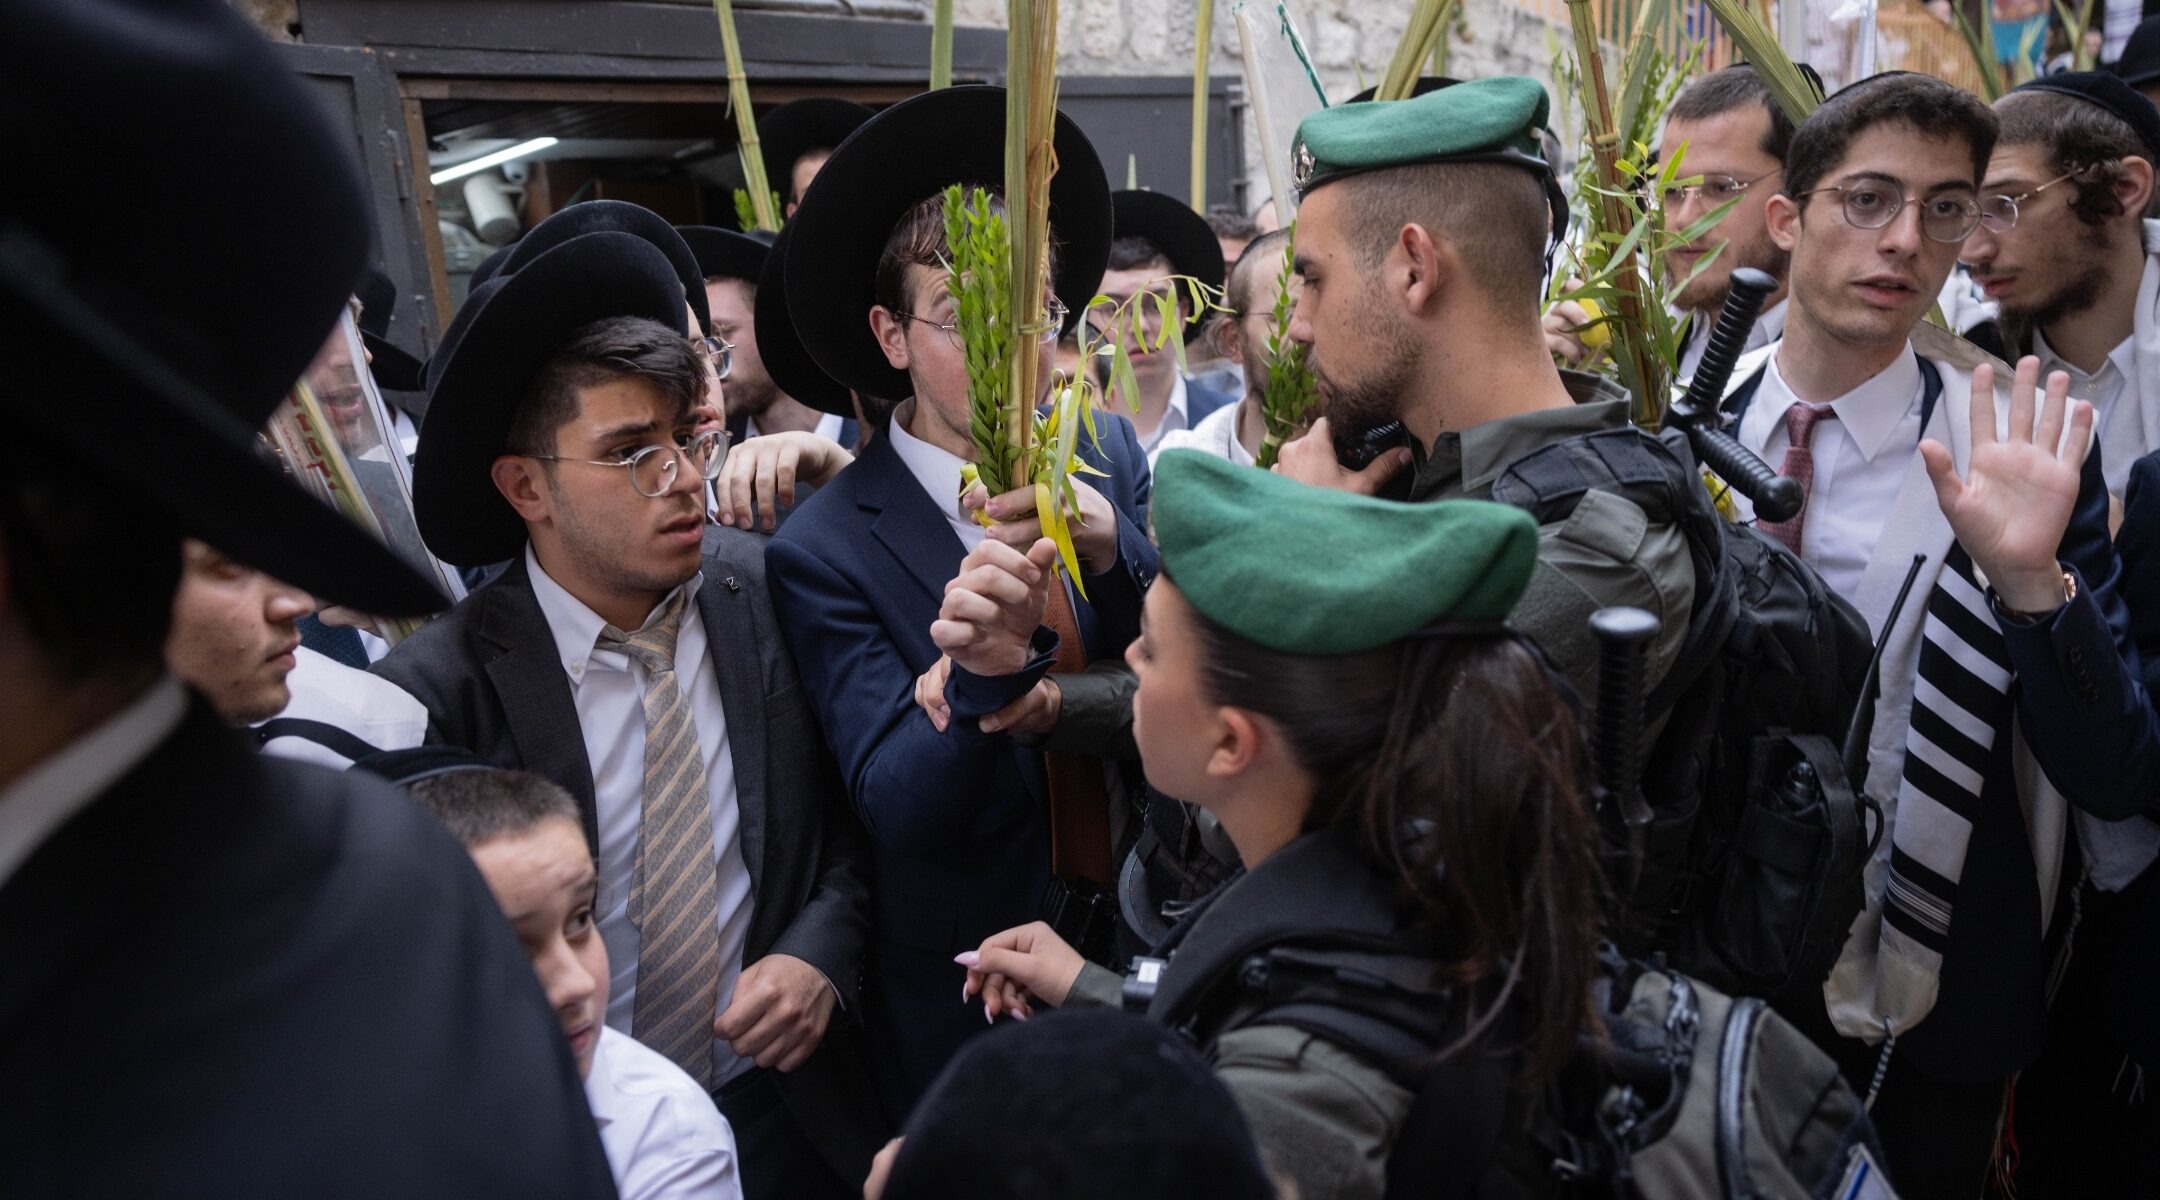 Israeli border police stand guard near Orthodox Jews in the Old City’s Christian quarter, after an incident in which Haredi Orthodox Jews spat at a Christian procession carrying a cross through Jerusalem's Old City. (Photo/JTA-Chaim Goldberg-Flash90)